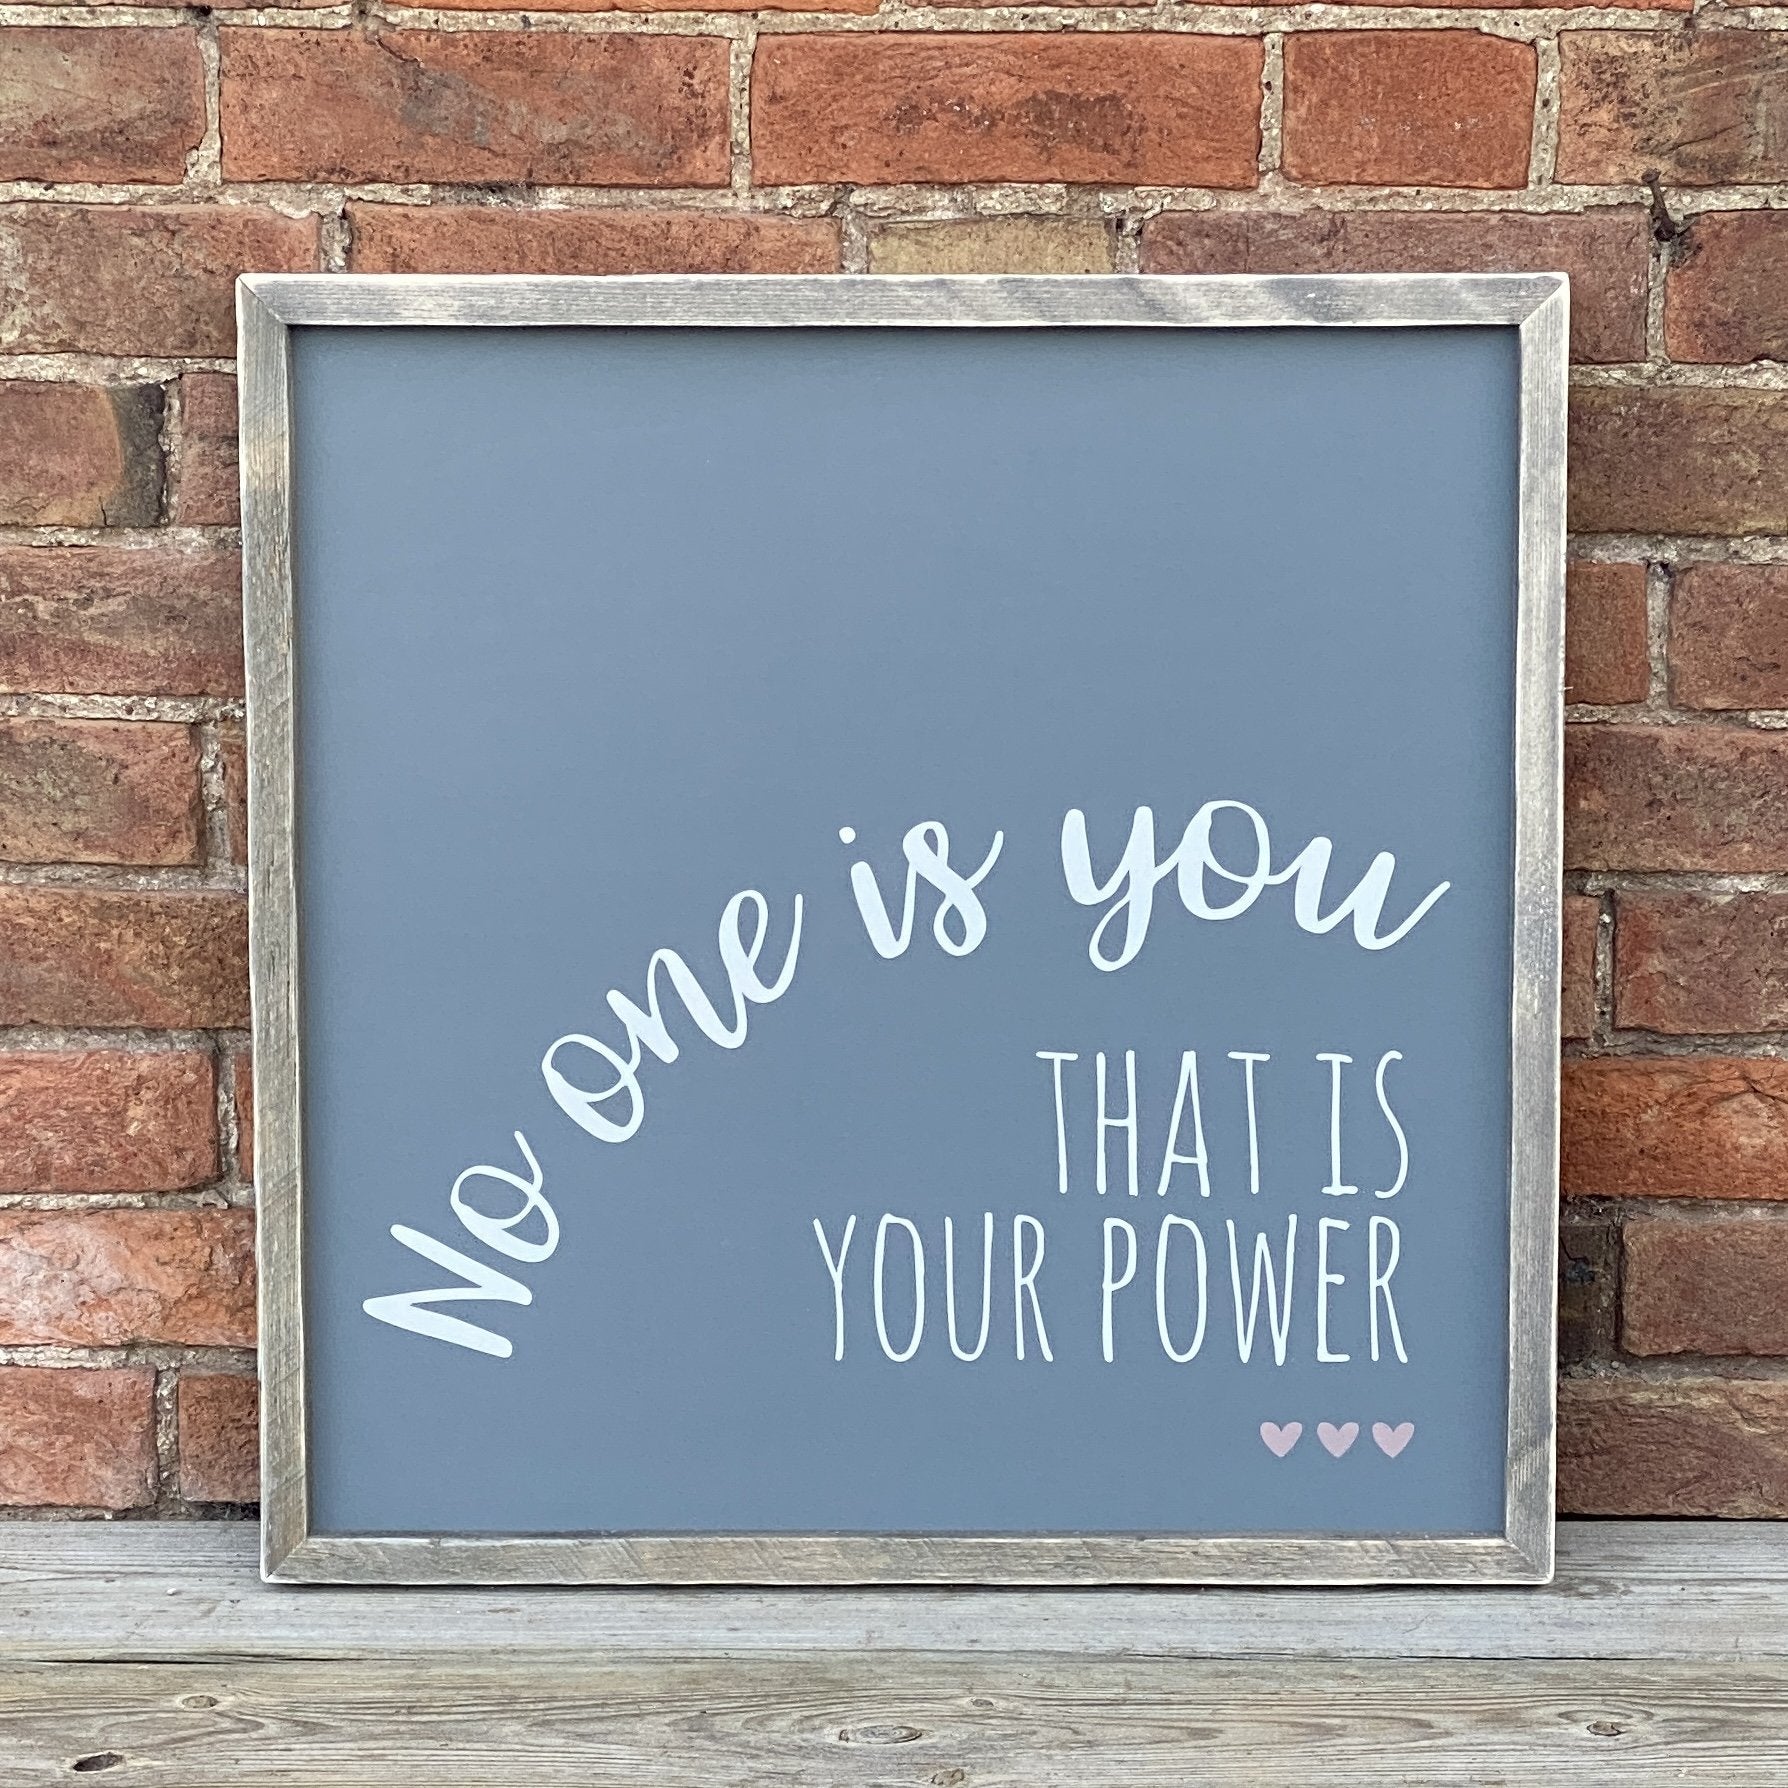 No one is you | Framed Wood Sign - The Imperfect Wood Company - Framed Wood Sign